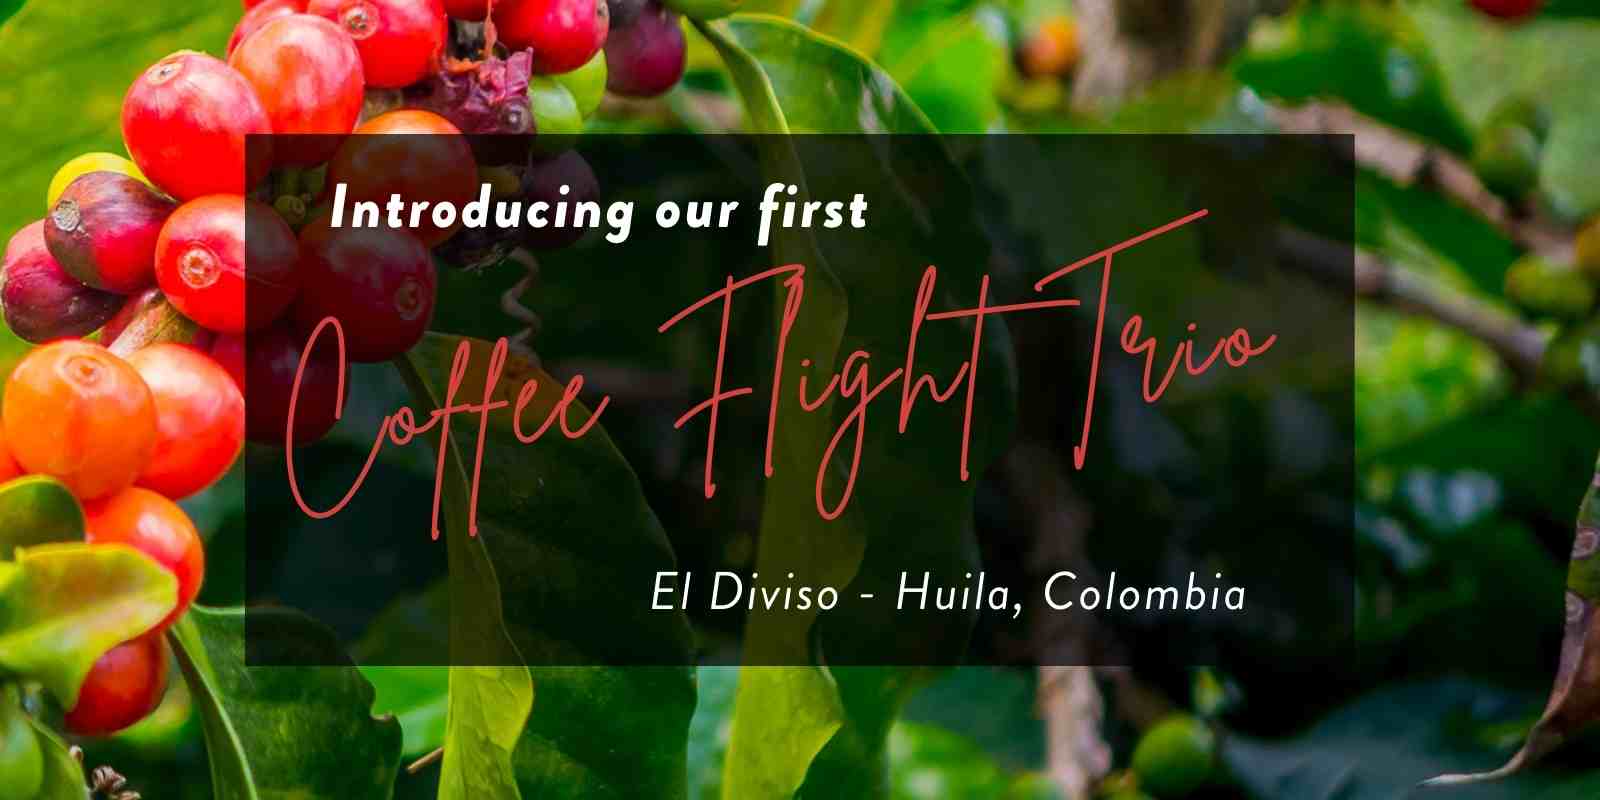 Local Brisbane Coffee Roastery brings tantalisingly rare Coffee Flight Trio from Colombia to Australian Coffee lovers.